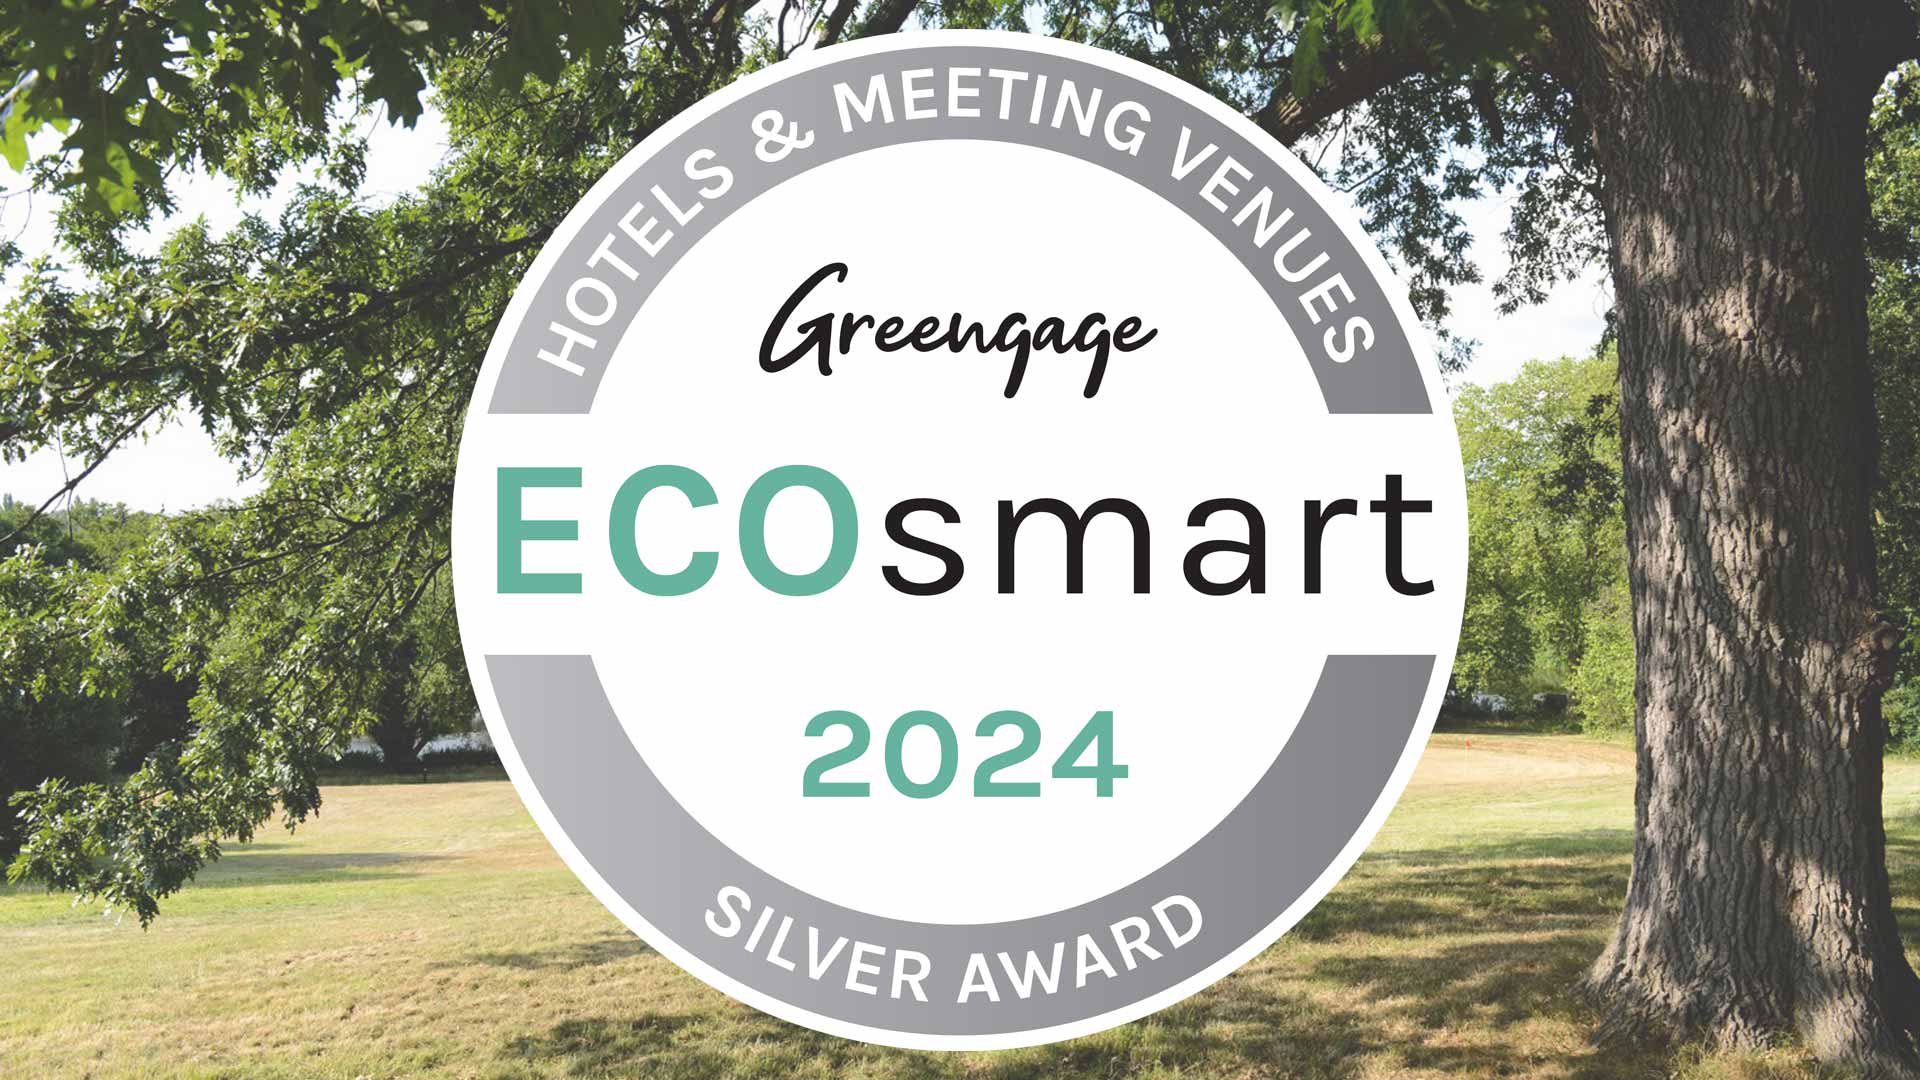 Our Greengage ECOsmart silver award 2024